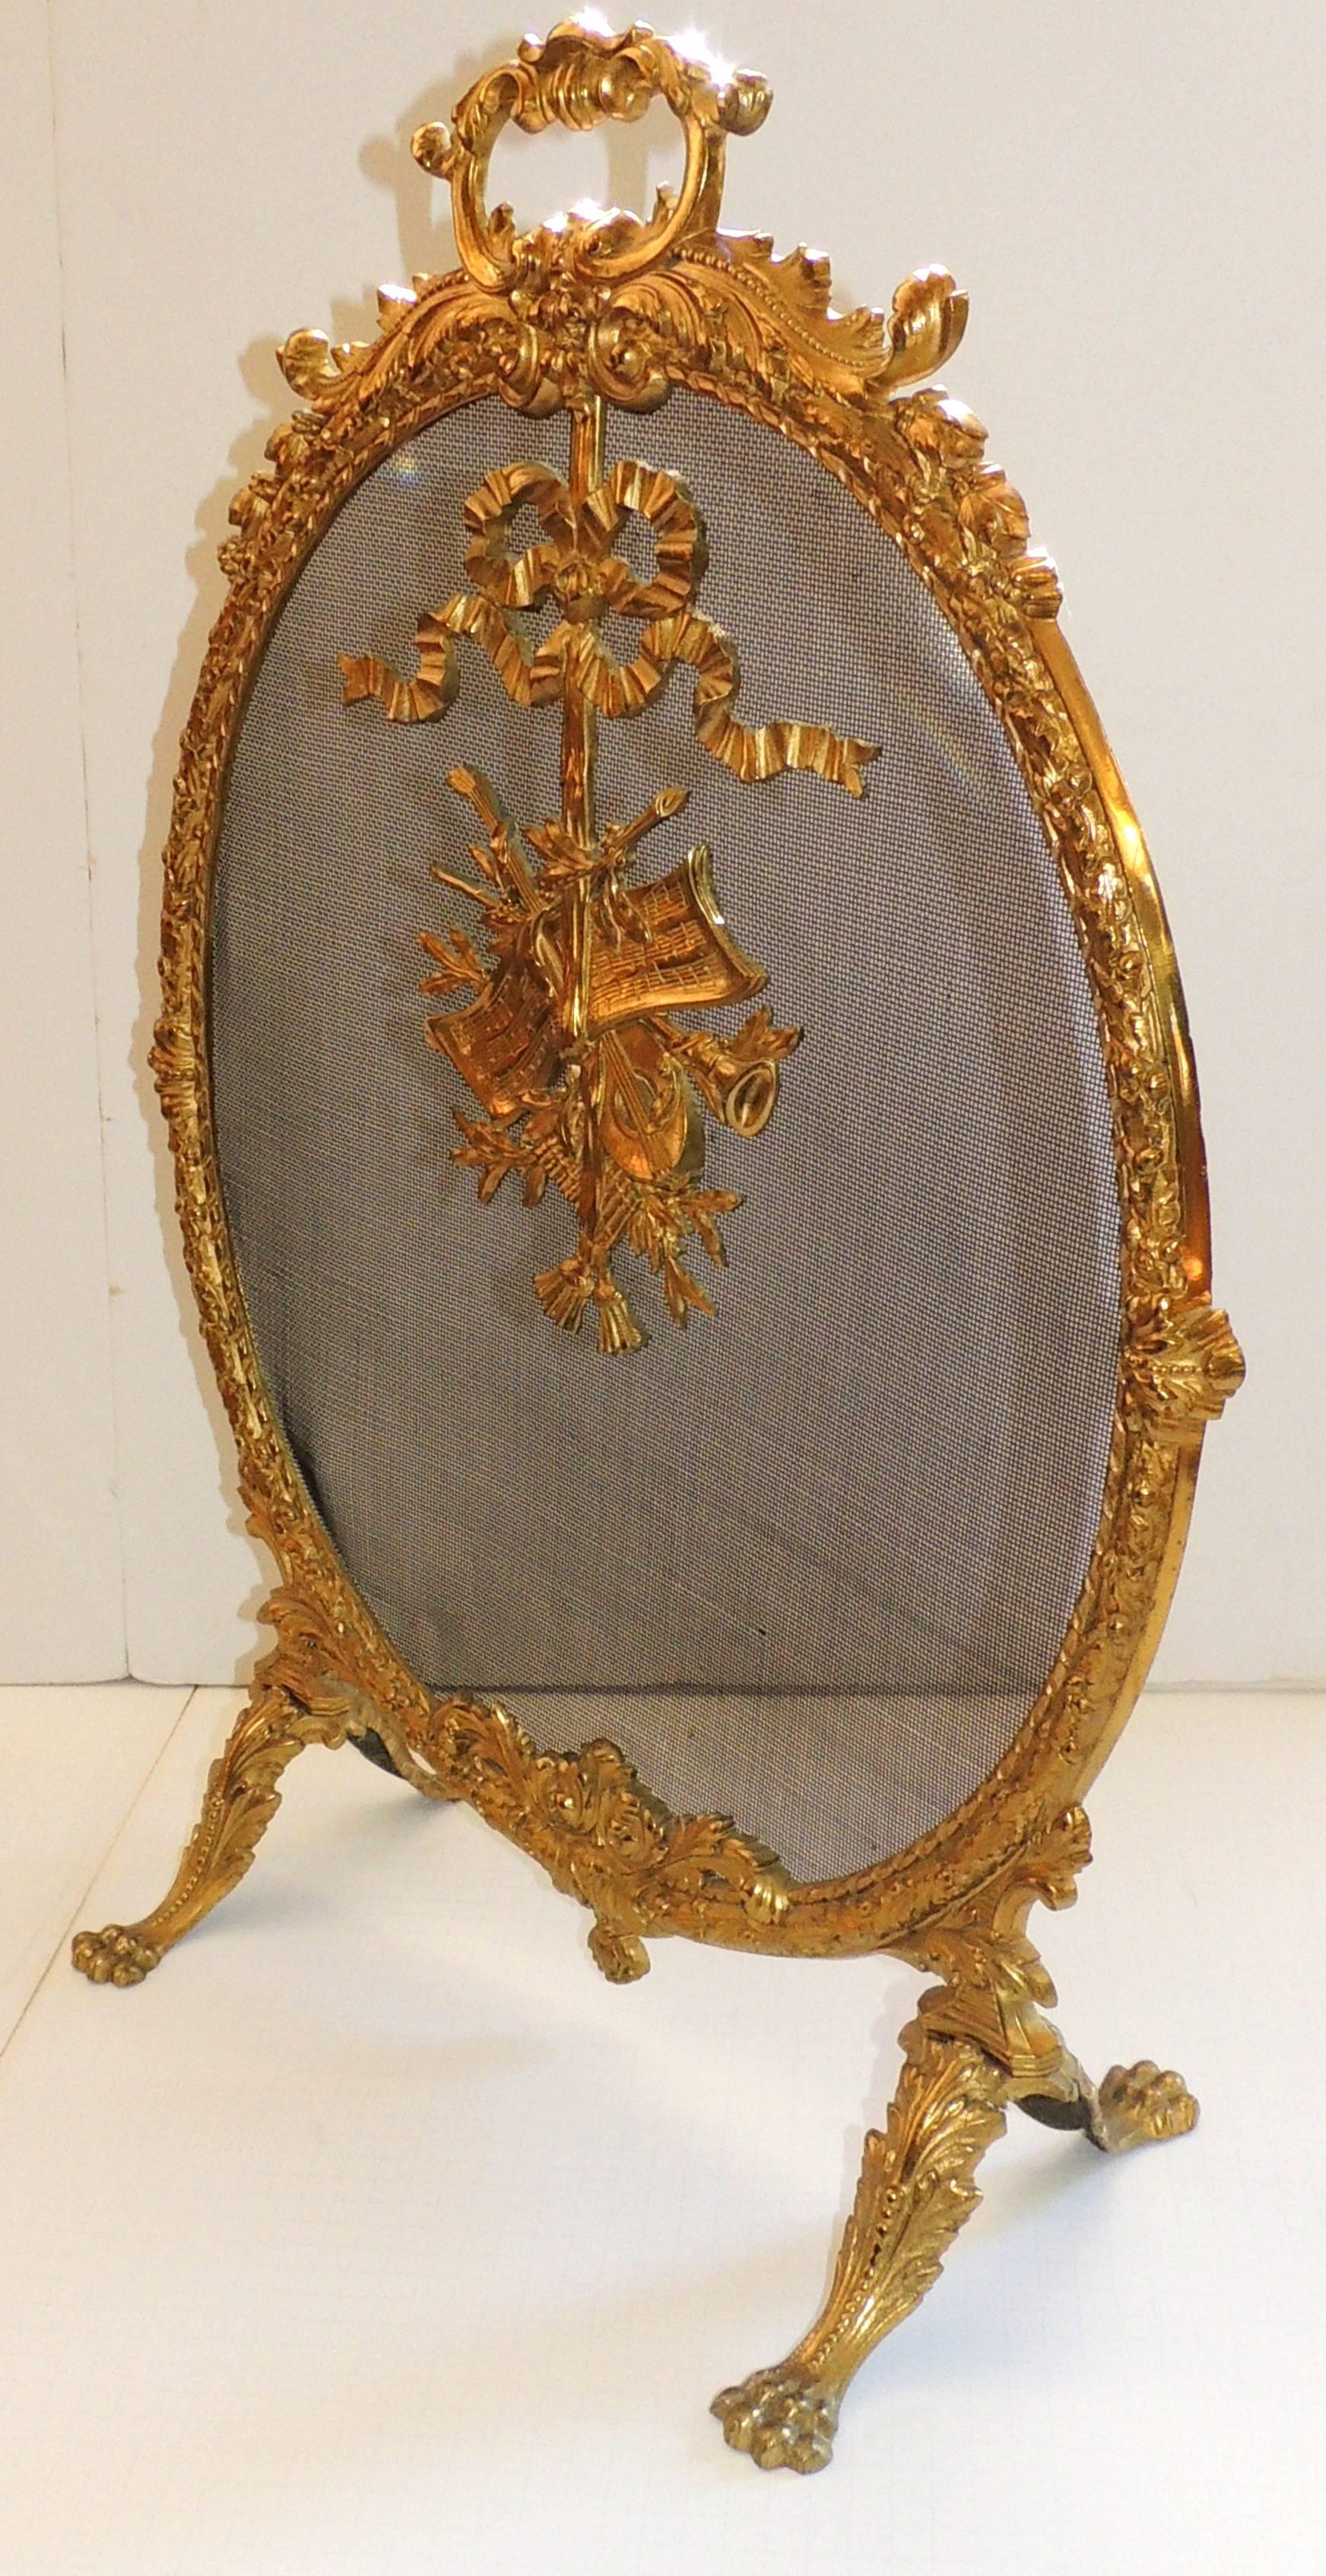 Mid-20th Century French Doré Bronze Oval Ormolu-Mounted Basket Bows Instruments Fireplace Screen